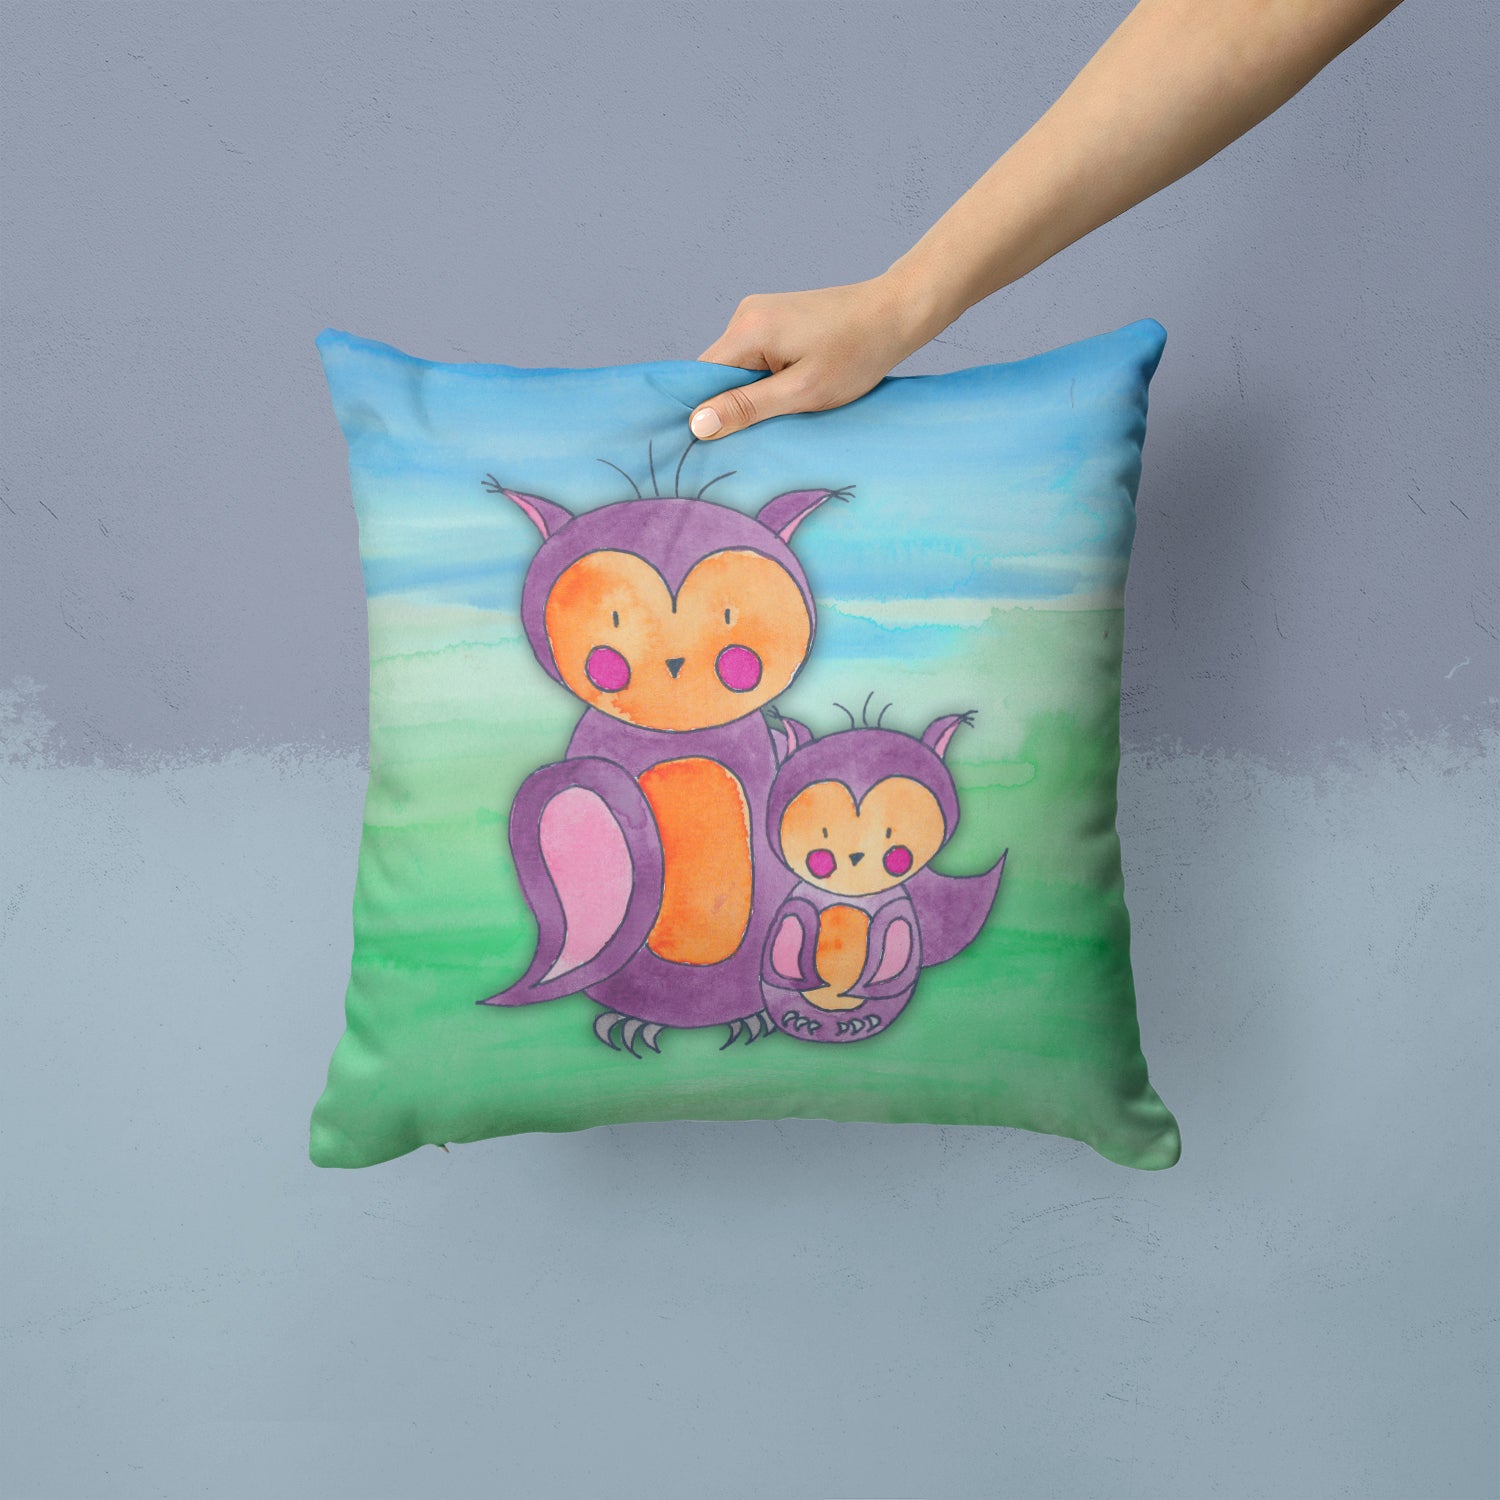 Momma and Baby Owl Watercolor Fabric Decorative Pillow BB7430PW1414 - the-store.com